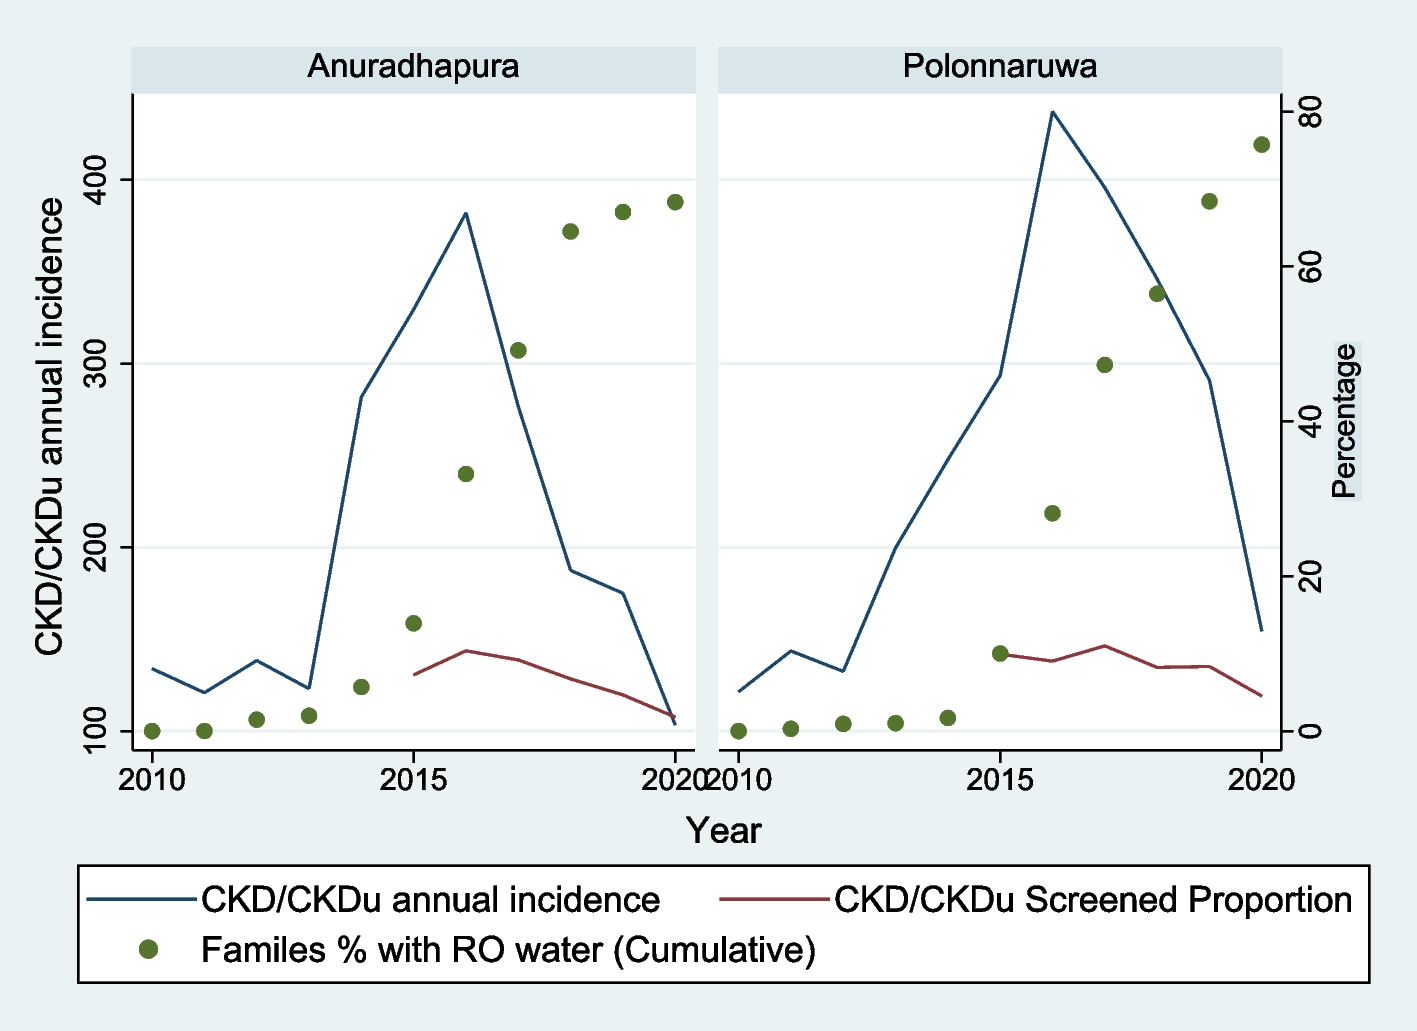 Decreasing incidence of hospital diagnosed CKD/CKDu in North Central Province of Sri Lanka: is it related to provision of drinking water reverse osmosis plants?